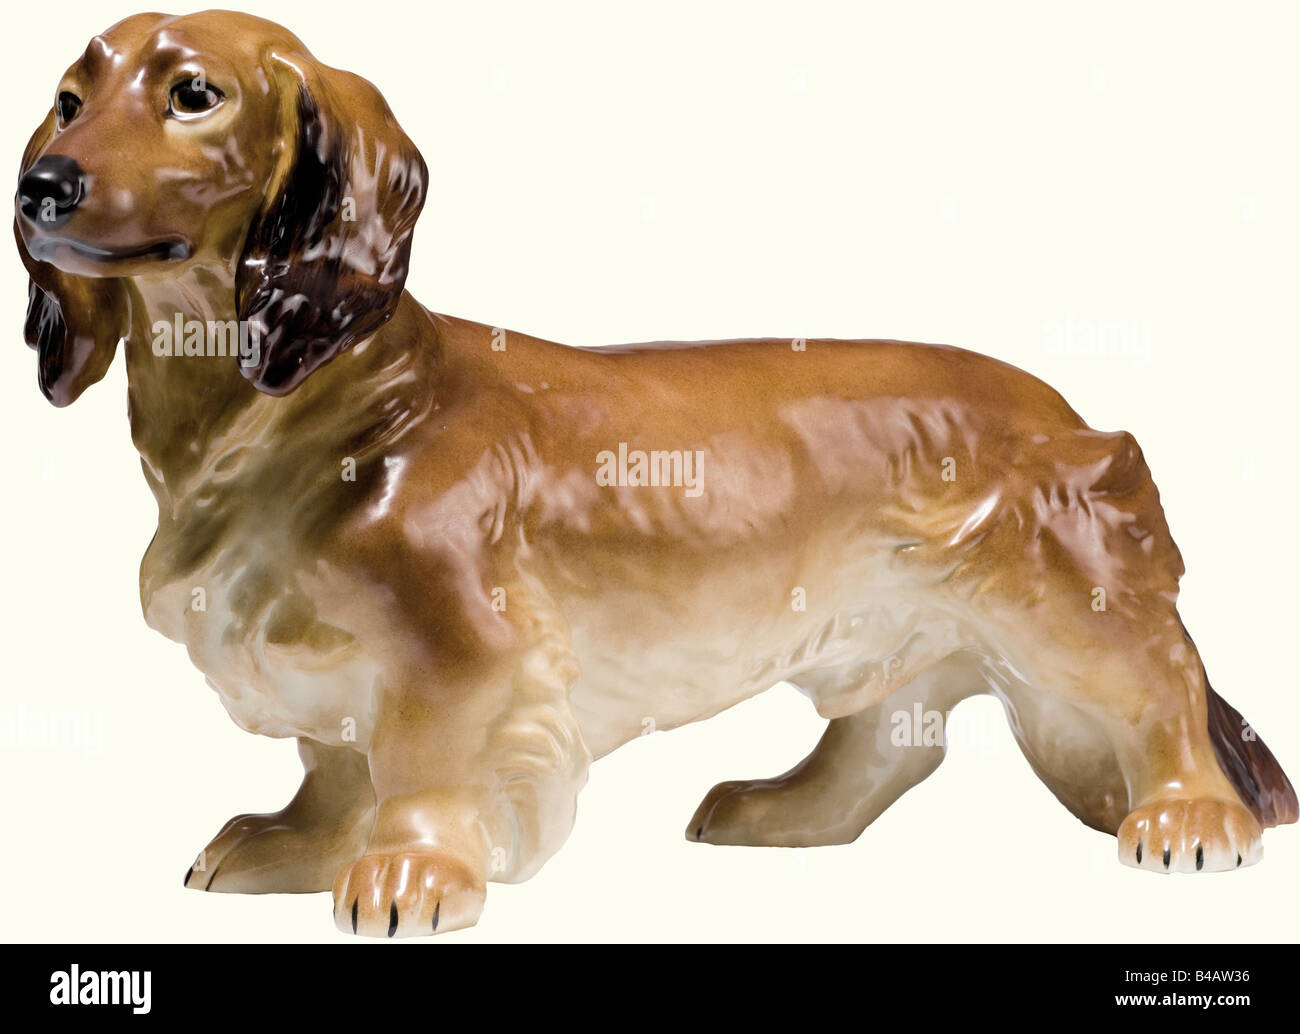 A long-haired dachshund., Coloured and glazed porcelain figure, on the belly the press mark of the porcelain factory. Undamaged. Height 19 cm. Slight variation of the dachshund described in the previous lot, this one being a late wartime product. fine arts, 1930s, 1930s, 20th century, object, objects, stills, clipping, clippings, cut out, cut-out, cut-outs, Artist's Copyright has not to be cleared Stock Photo